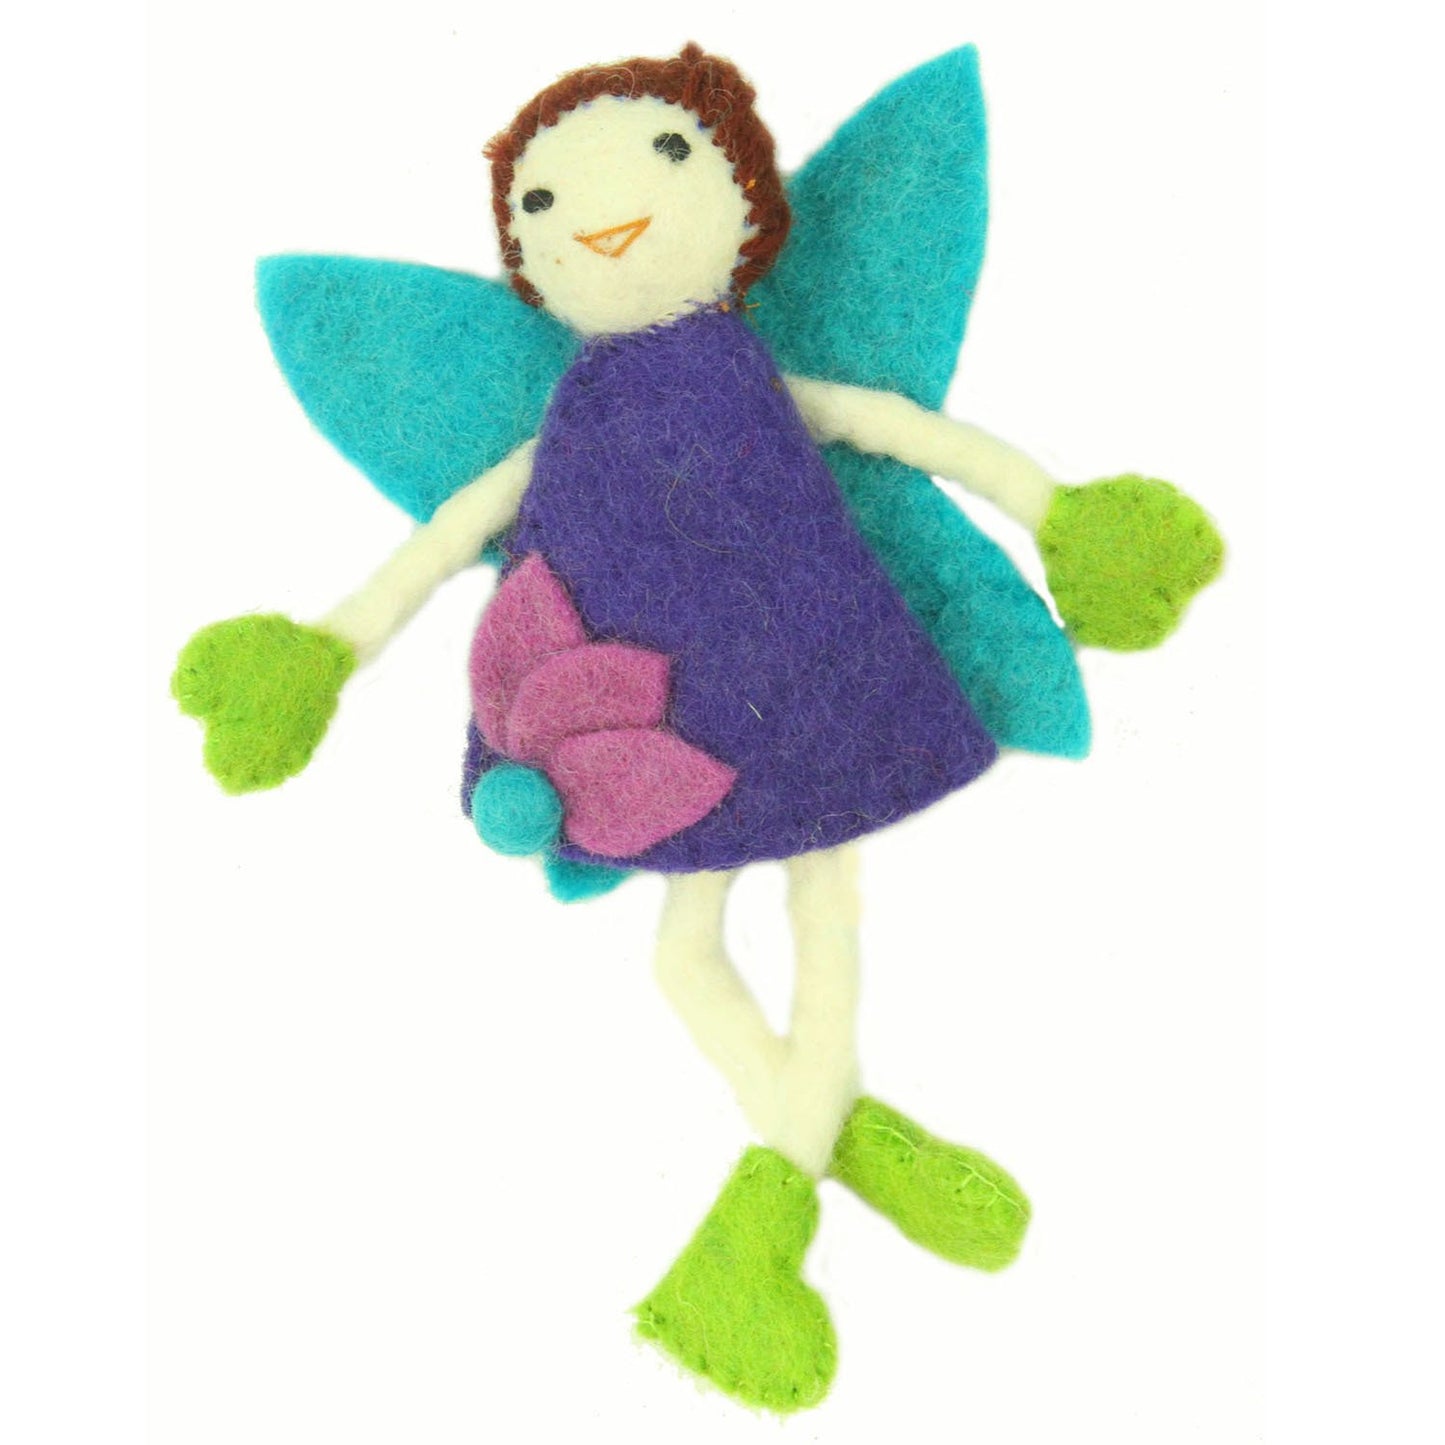 This Global Groove Life, handmade, ethical, fair trade, eco-friendly, sustainable, brunette-haired, purple and turquoise, tooth fairy, was created by artisans in Kathmandu Nepal and is adorned with an adorable flower motif.